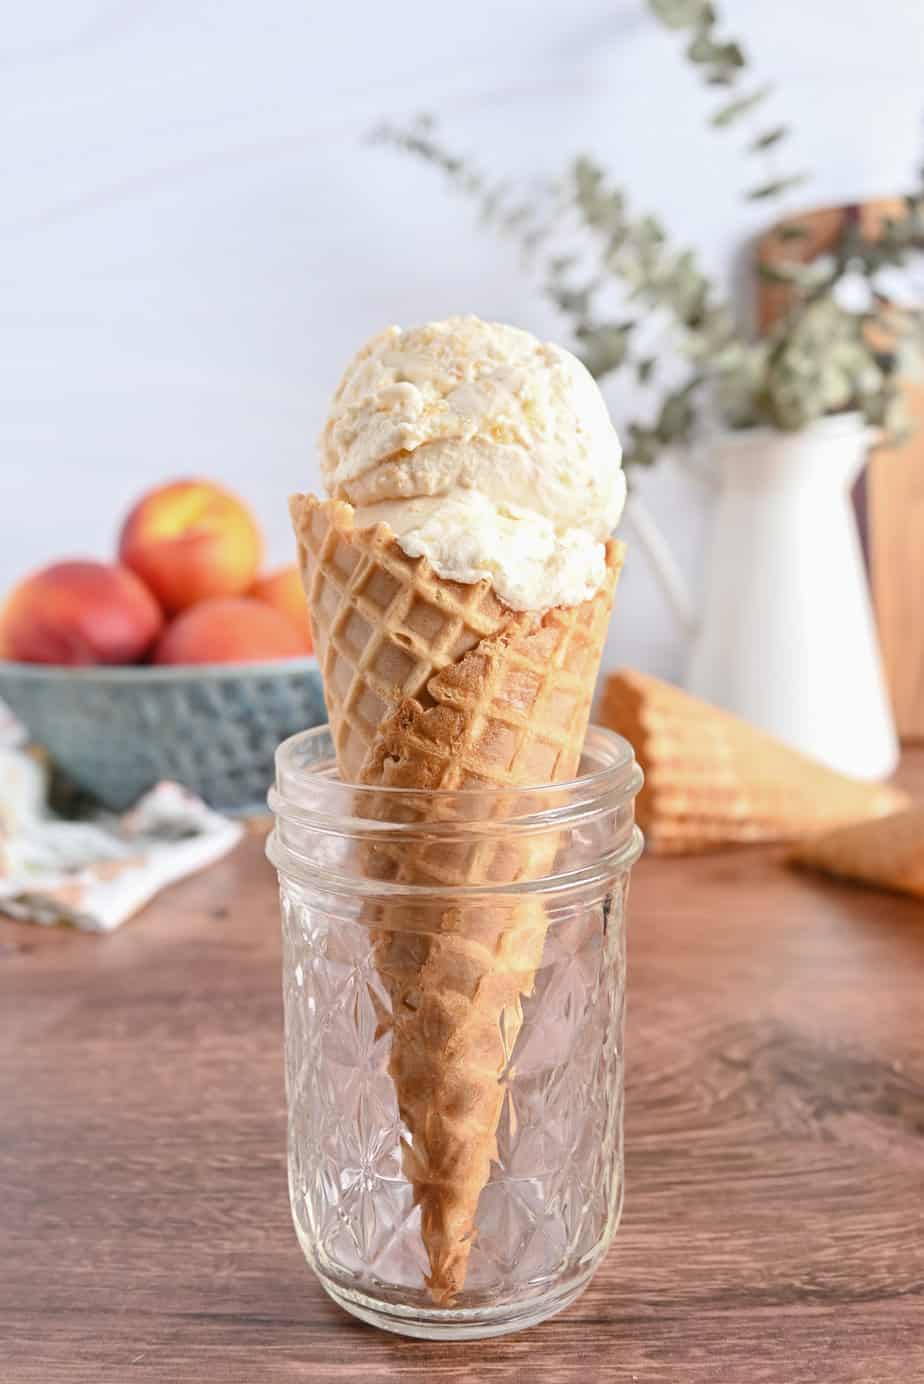 Glass jar holding up a waffle cone filled with peach ice cream.